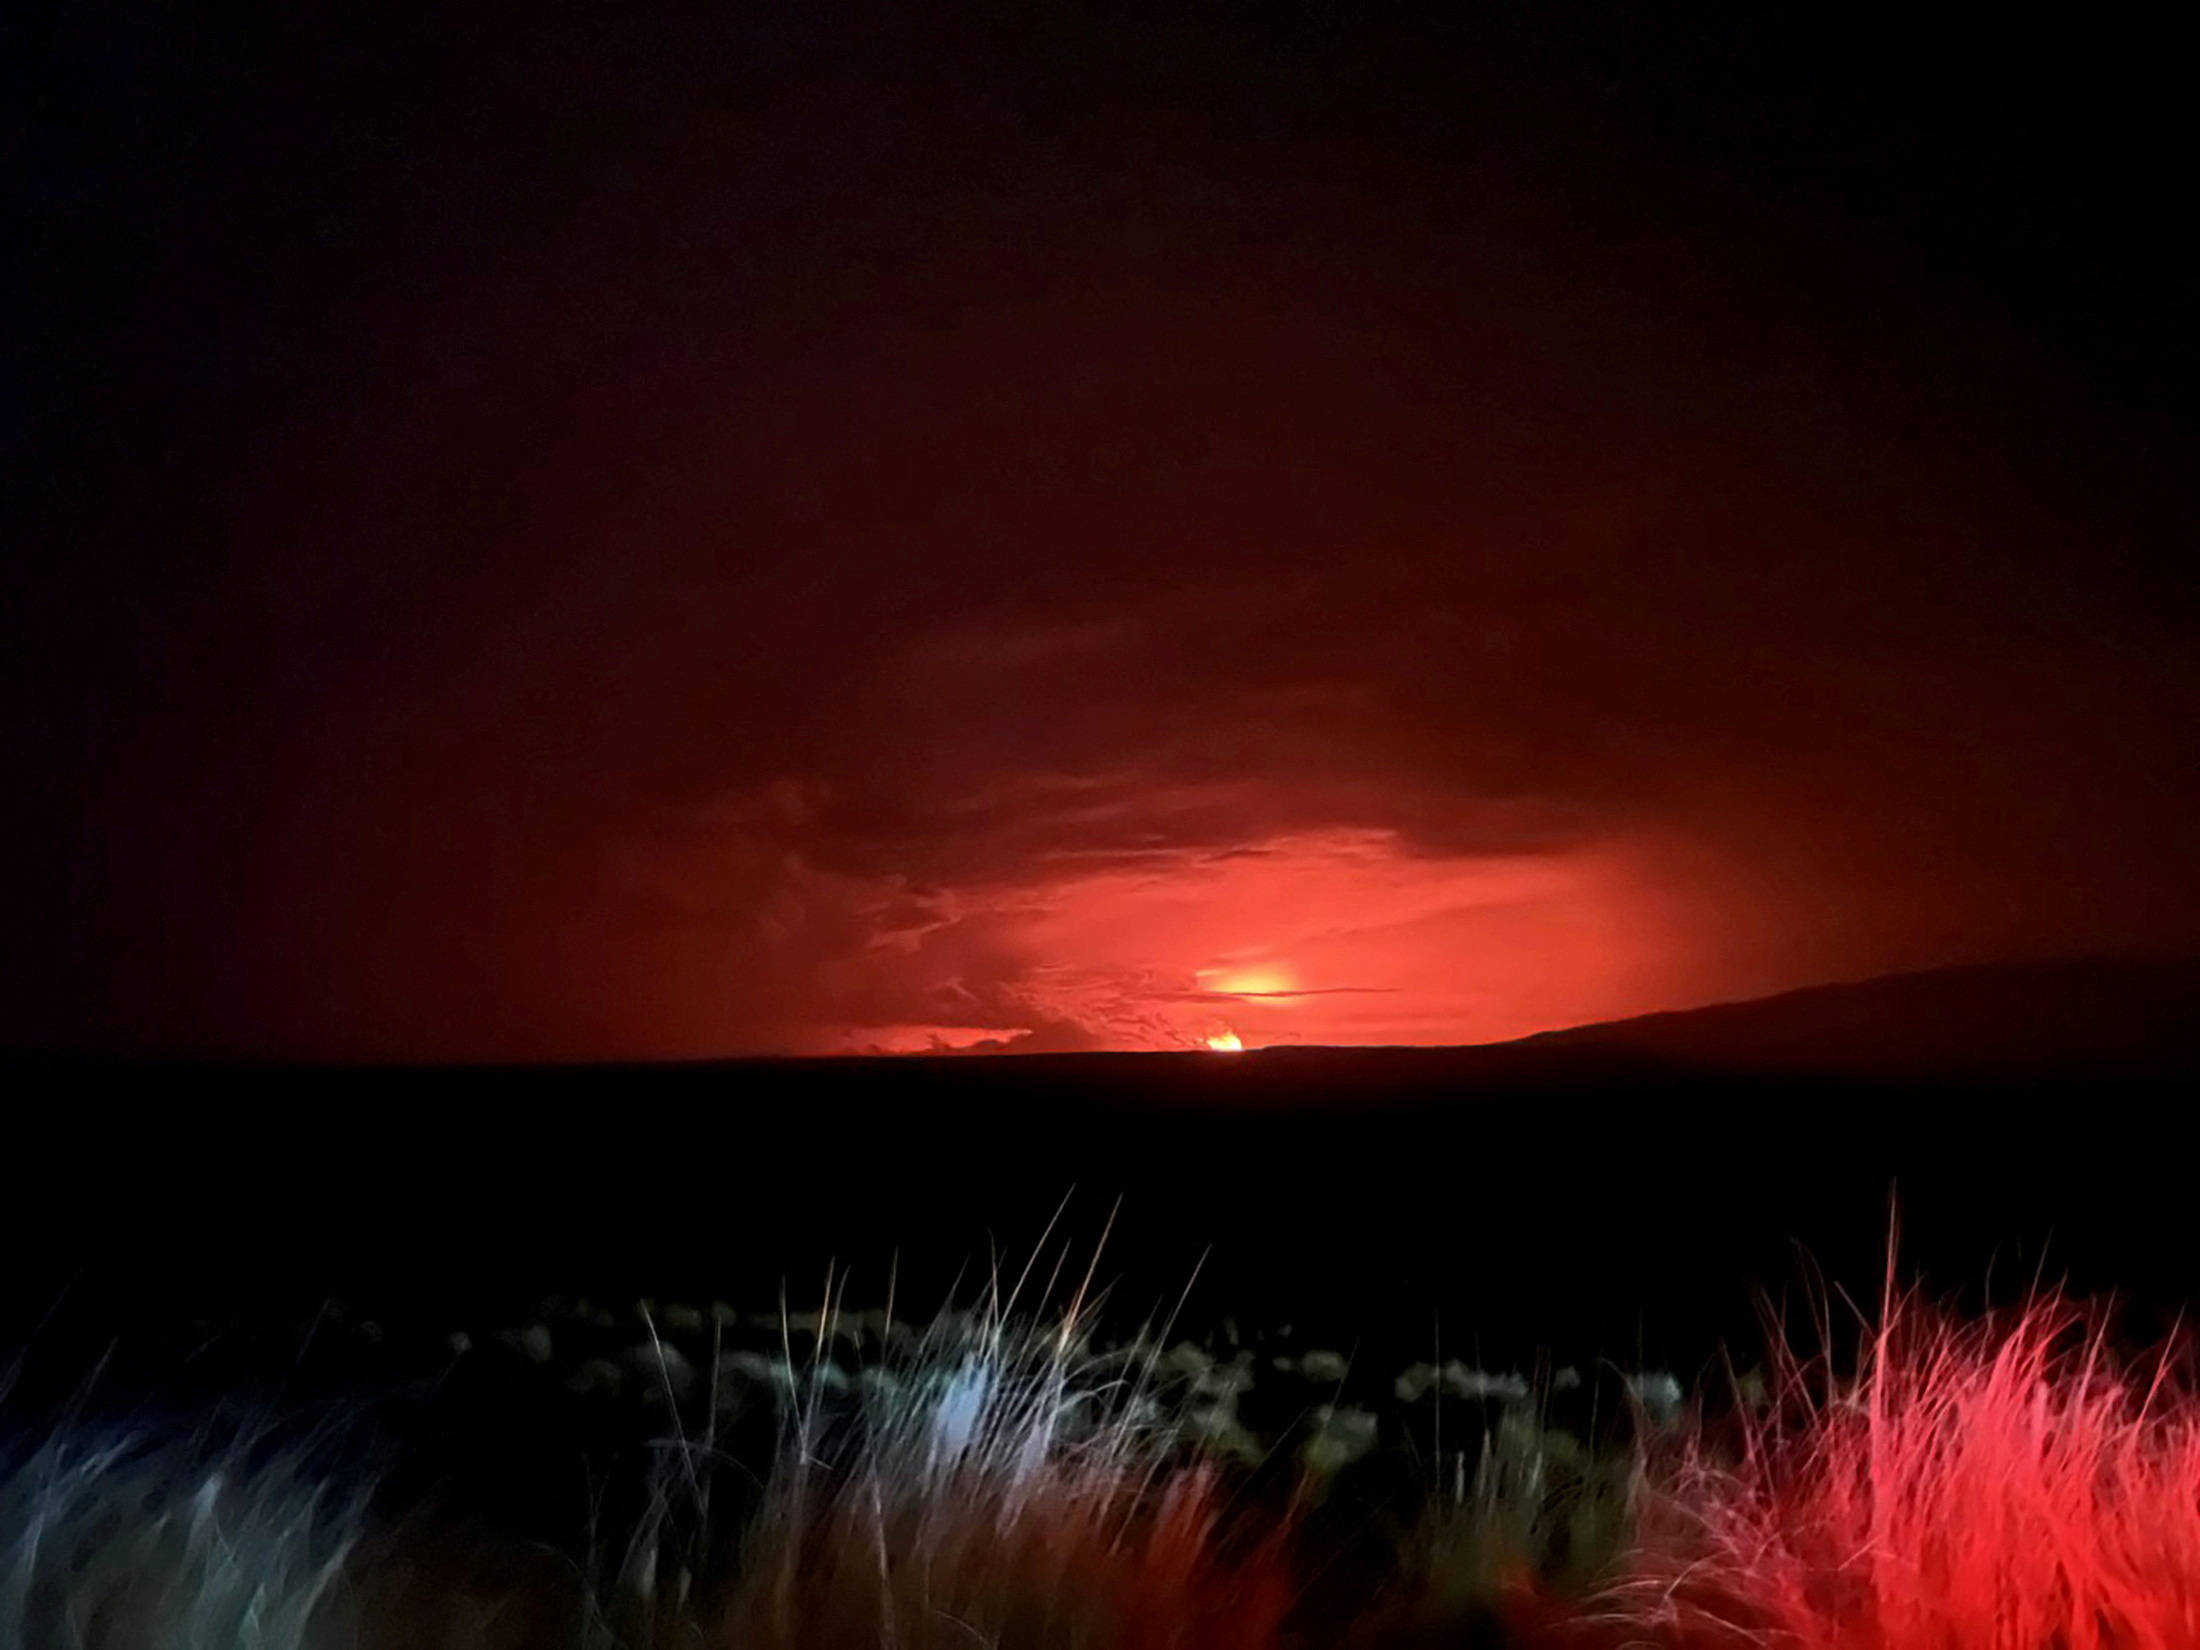 Mauna Loa’s summit region glows during an eruption as viewed by a geologist of the Hawaiian Volcano Observatory